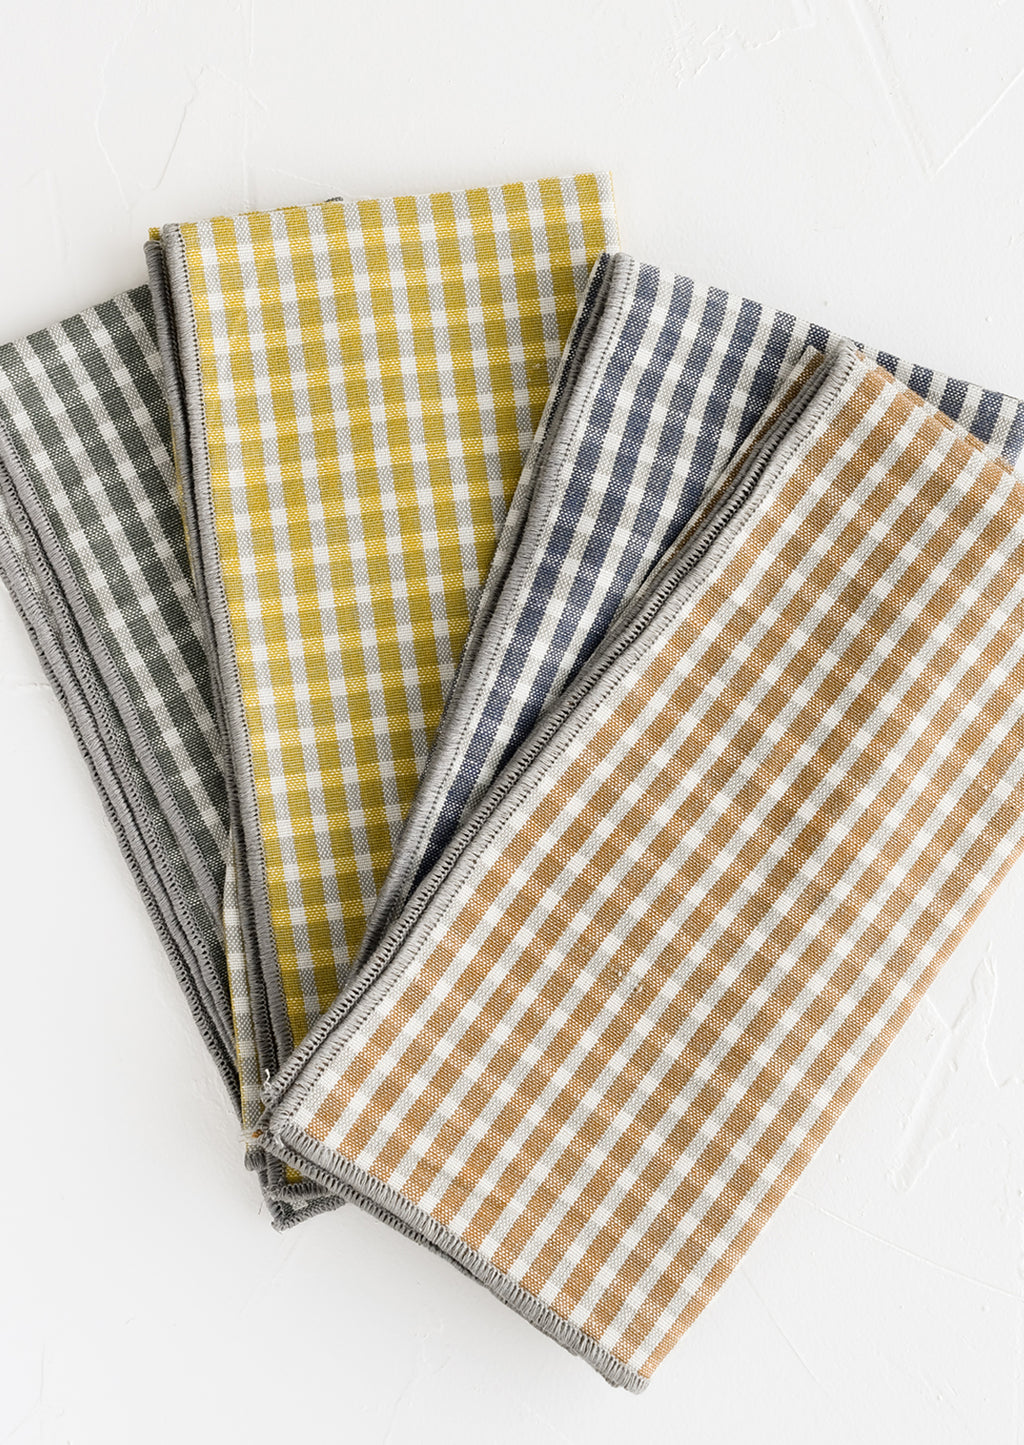 3: A set of four plaid print napkins in a mix of colors.